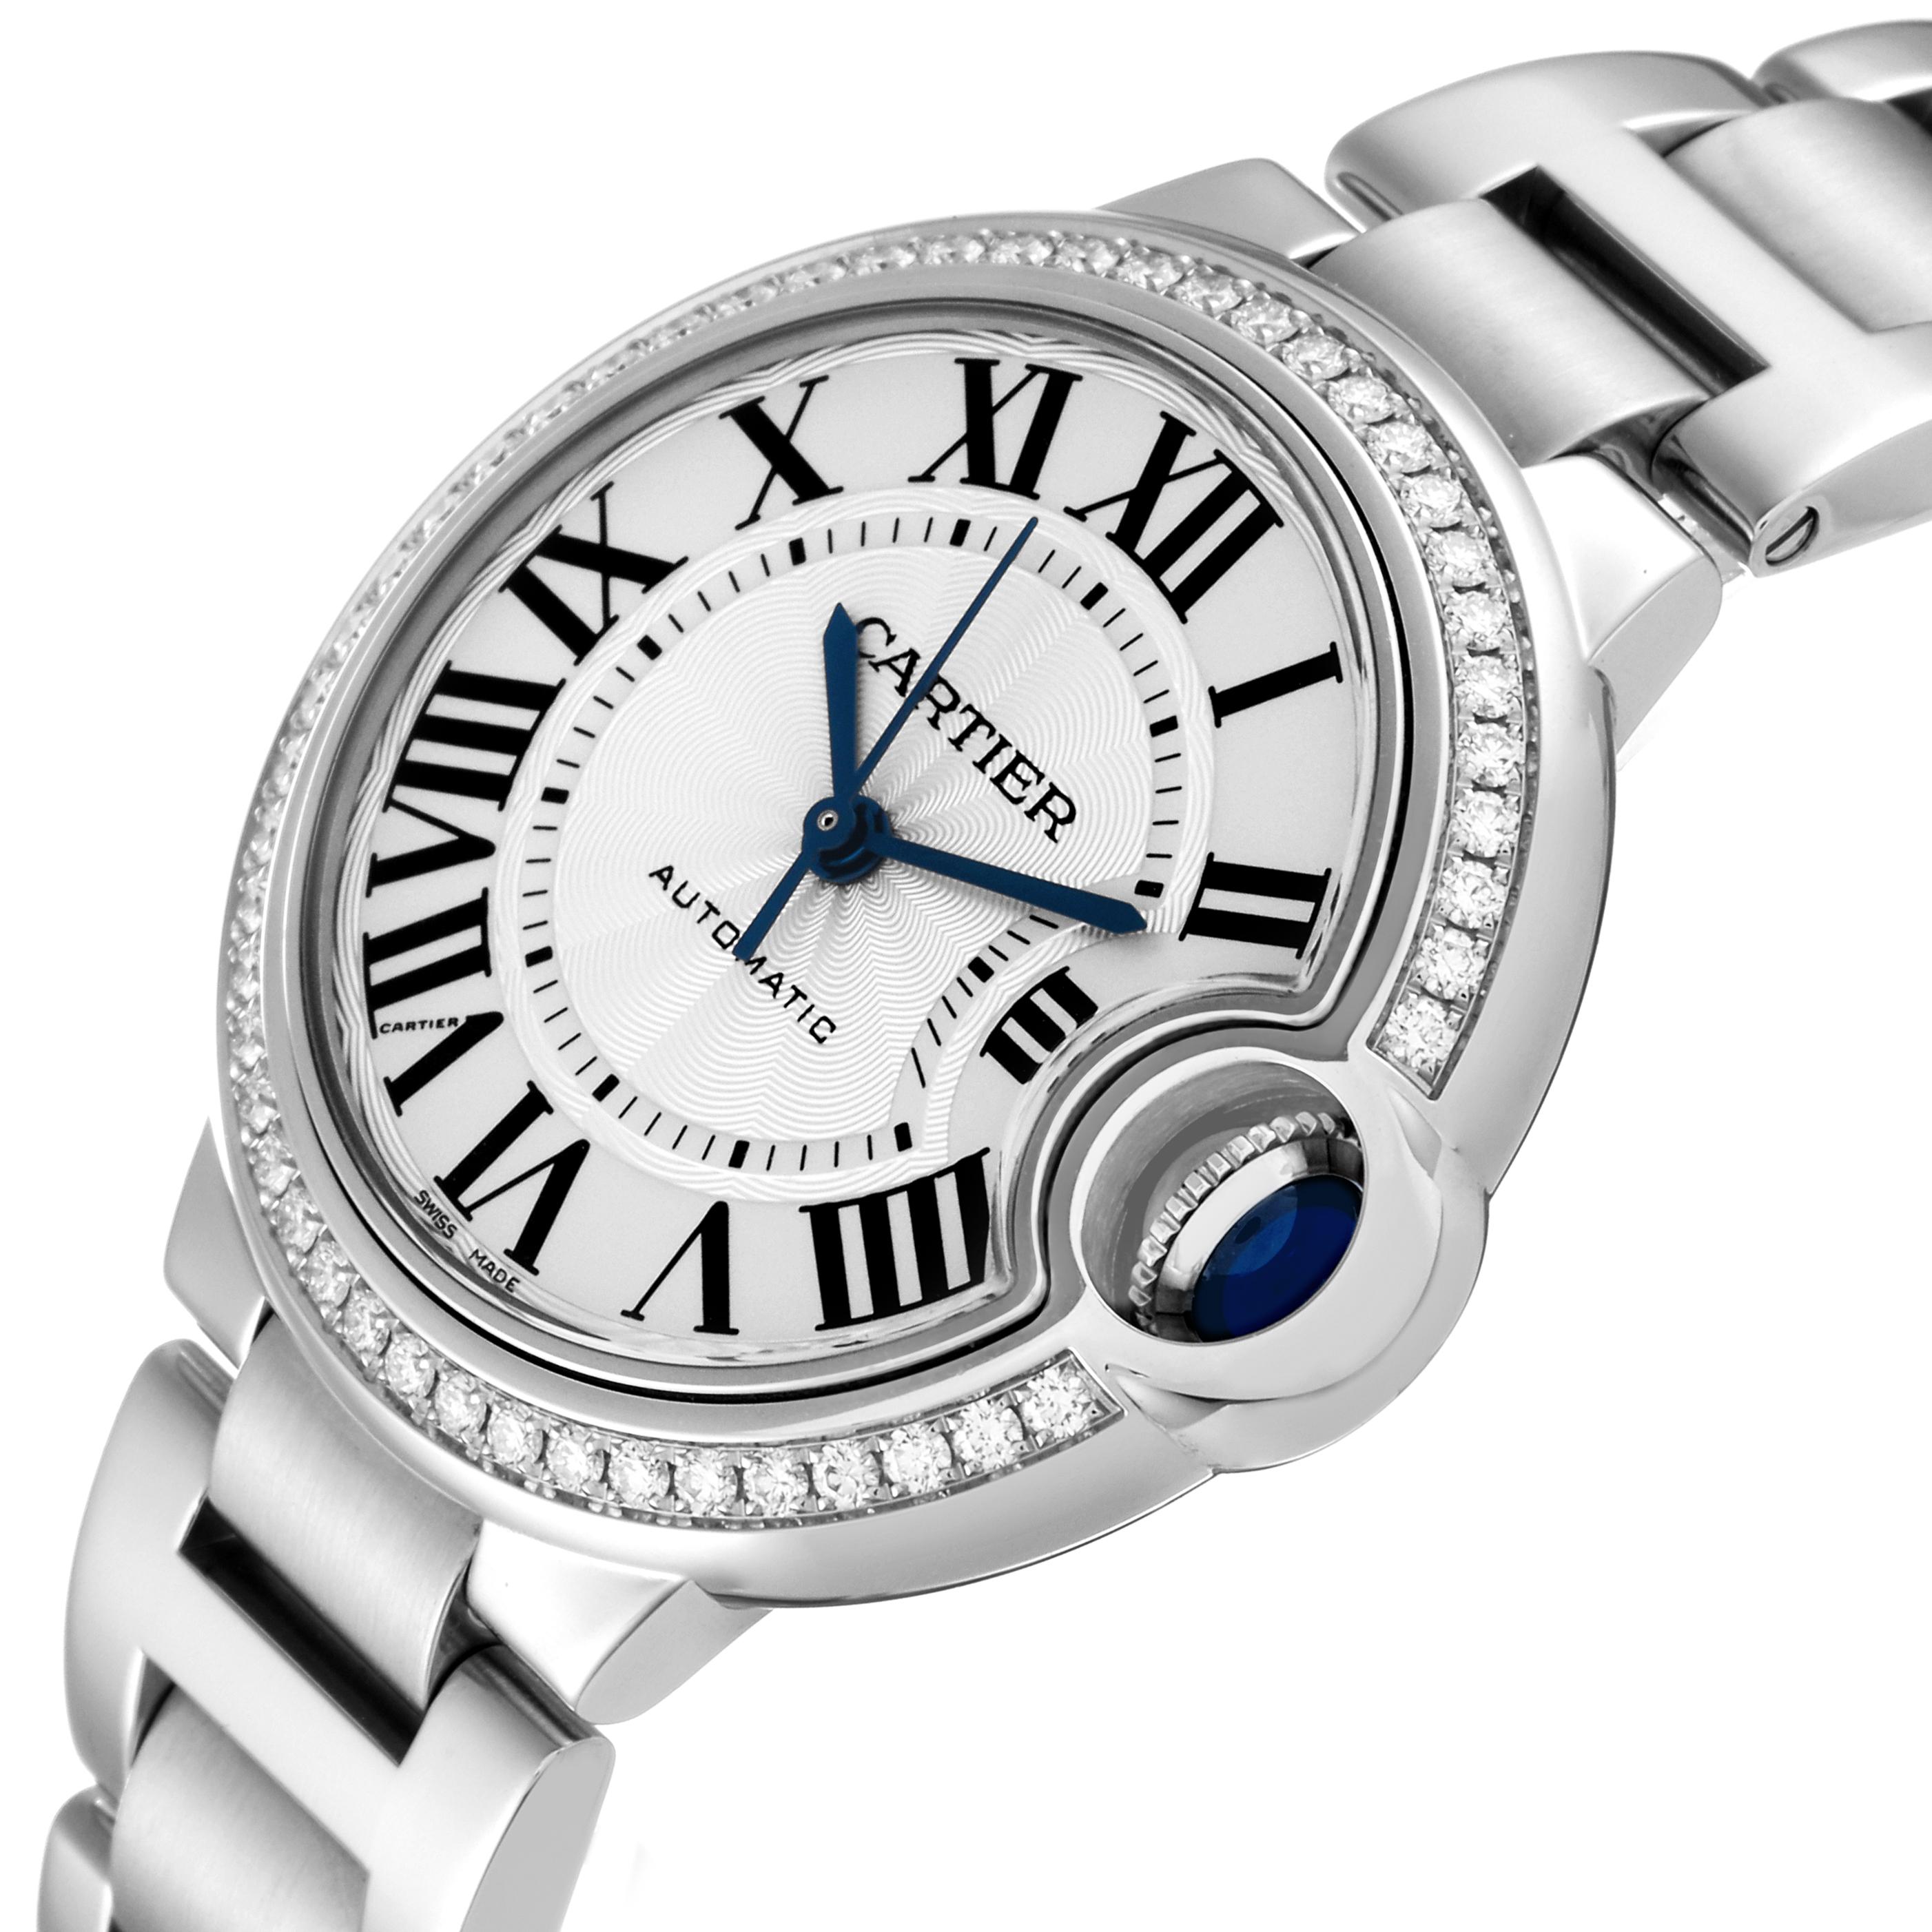 Cartier Ballon Bleu 33mm Steel Diamond Bezel Ladies Watch W4BB0016 Papers. Automatic self-winding movement. Stainless steel case 33.0 mm in diameter. Fluted crown set with a blue spinel cabochon. Original Cartier factory diamond bezel. Scratch